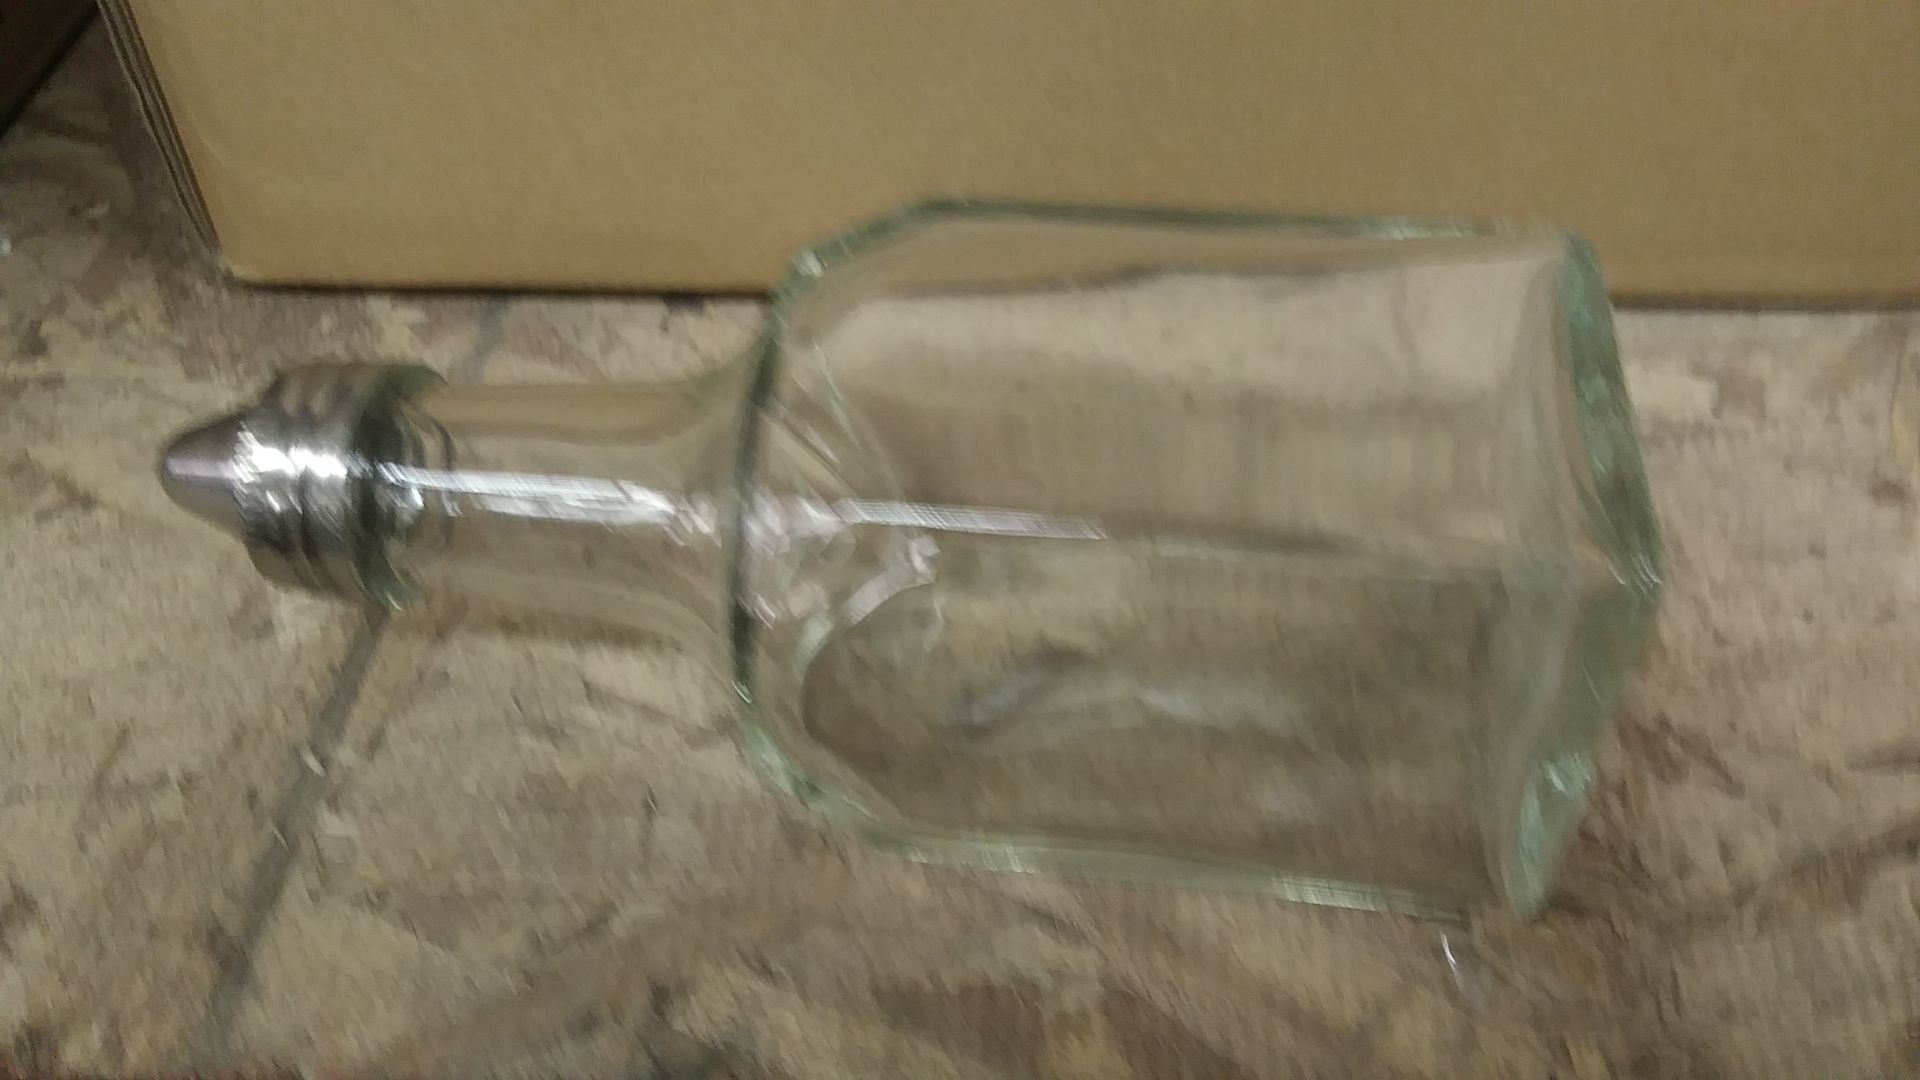 GLASS SALT / PEPPER/ SEASONING SHAKERS (INCLUDES QTY 150) - Image 2 of 4